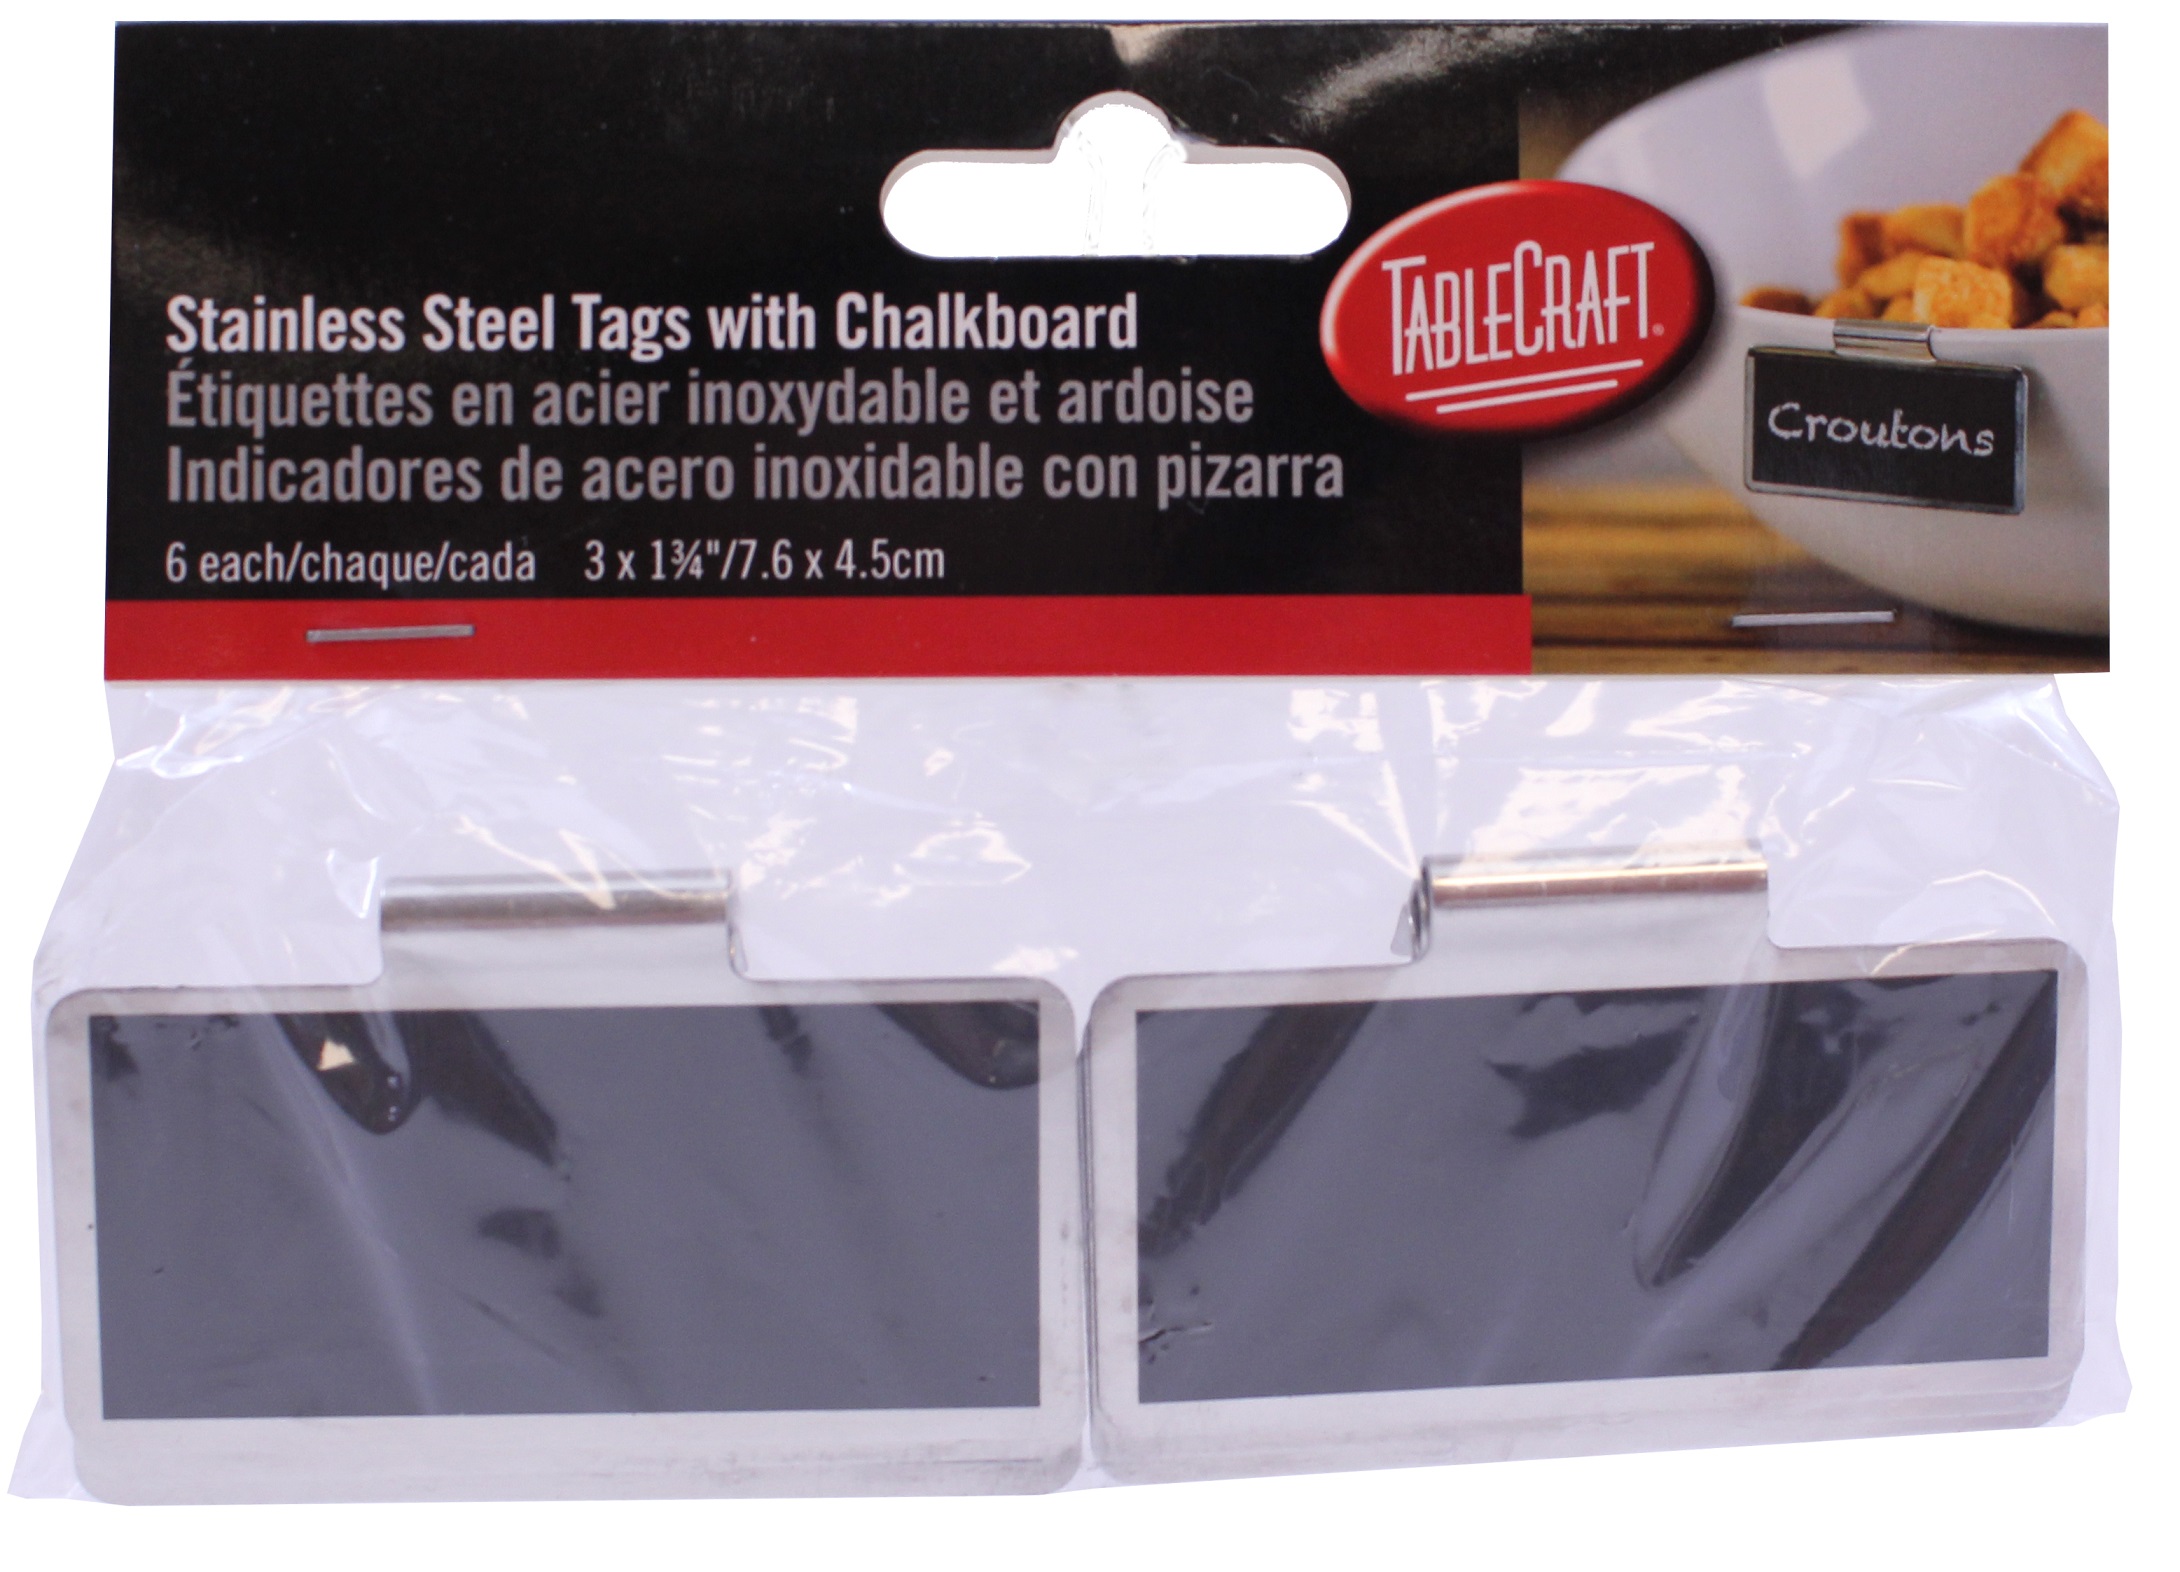 CBTSS3 STAINLESS STEEL TAG WITH CHALKBOARD TABLECRAFT